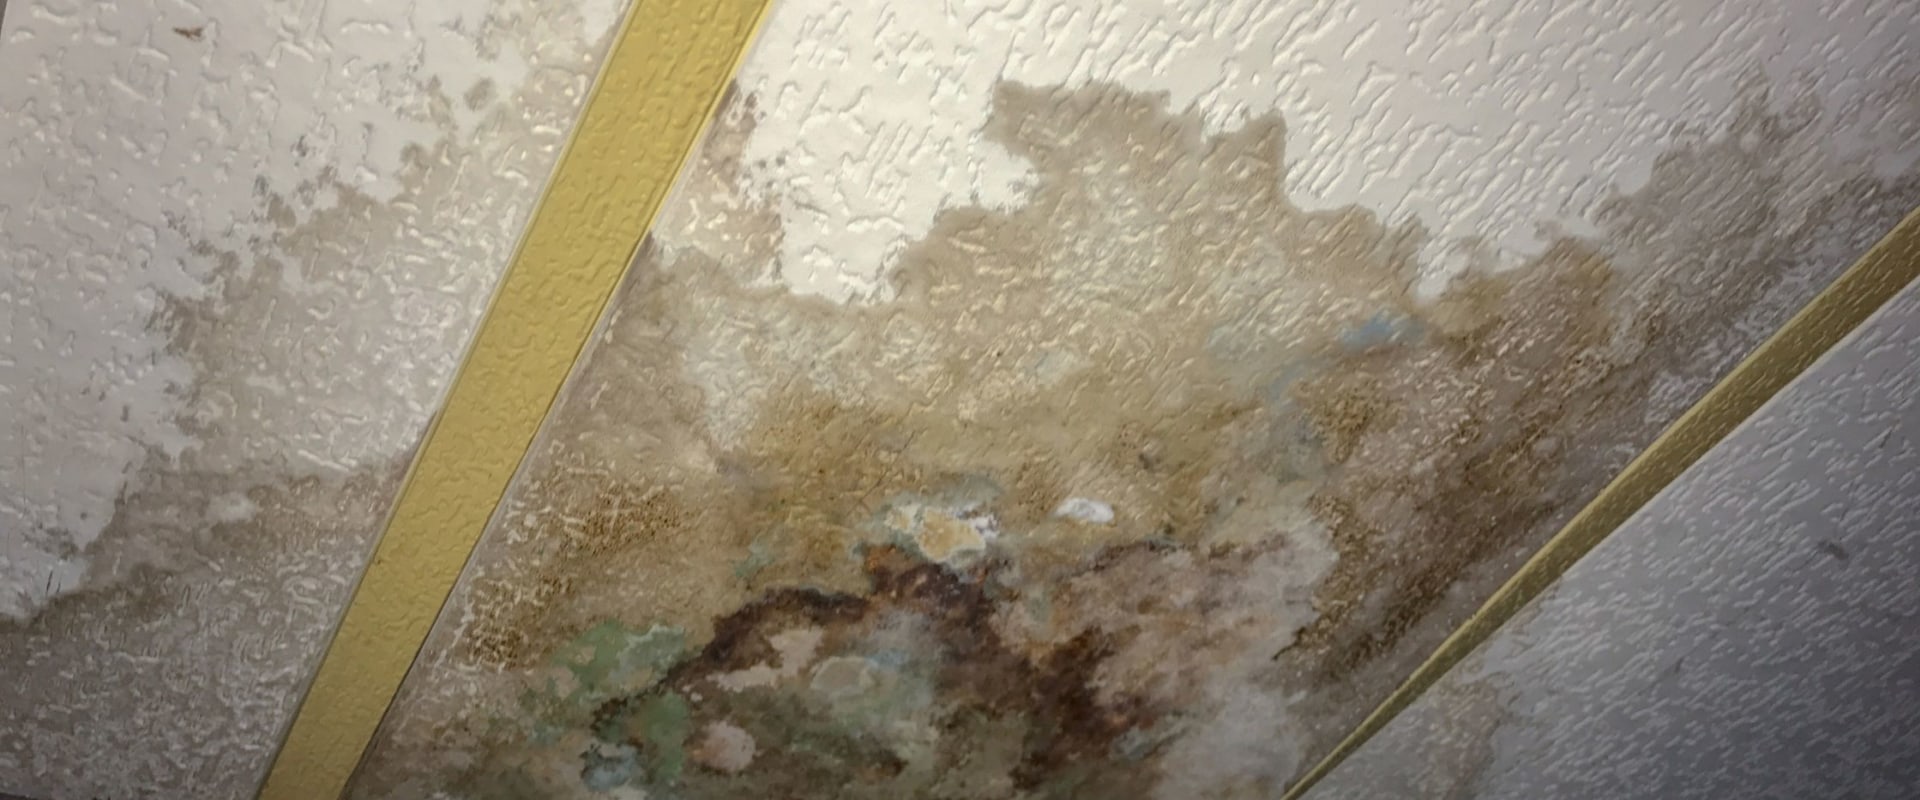 Will a one time water leak cause mold?